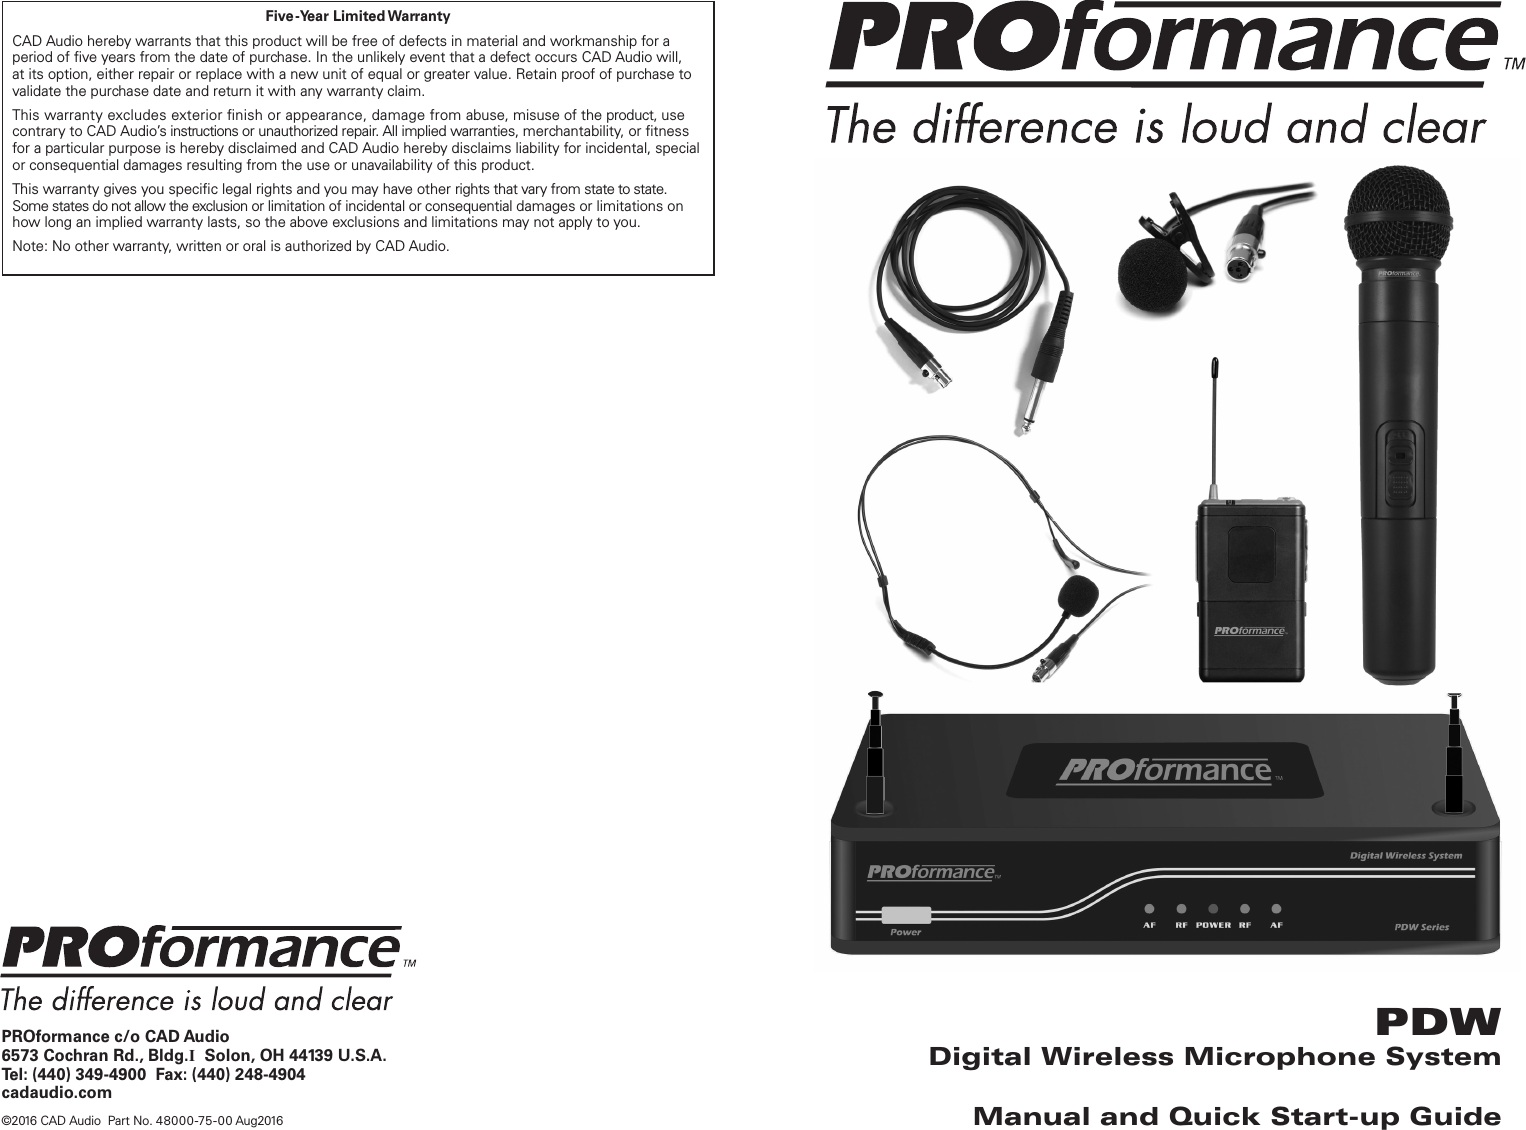 PROformance c/o CAD Audio6573 Cochran Rd., Bldg.I  Solon, OH 44139 U.S.A.Tel: (440) 349-4900  Fax: (440) 248-4904cadaudio.com©2016 CAD Audio  Part No. 48000-75 -00 Aug2016PDWDigital Wireless Microphone SystemManual and Quick Start-up GuideFive-Year  Limited WarrantyCAD Audio hereby warrants that this product will be free of defects in material and workmanship for a period of ve years from the date of purchase. In the unlikely event that a defect occurs CAD Audio will, at its option, either repair or replace with a new unit of equal or greater value. Retain proof of purchase to validate the purchase date and return it with any warranty claim.This warranty excludes exterior nish or appearance, damage from abuse, misuse of the product, use contrary to CAD Audio’s instructions or unauthorized repair. All implied warranties, merchantability, or tness for a particular purpose is hereby disclaimed and CAD Audio hereby disclaims liability for incidental, special or consequential damages resulting from the use or unavailability of this product.This warranty gives you specic legal rights and you may have other rights that vary from state to state. Some states do not allow the exclusion or limitation of incidental or consequential damages or limitations on how long an implied warranty lasts, so the above exclusions and limitations may not apply to you.Note: No other warranty, written or oral is authorized by CAD Audio.